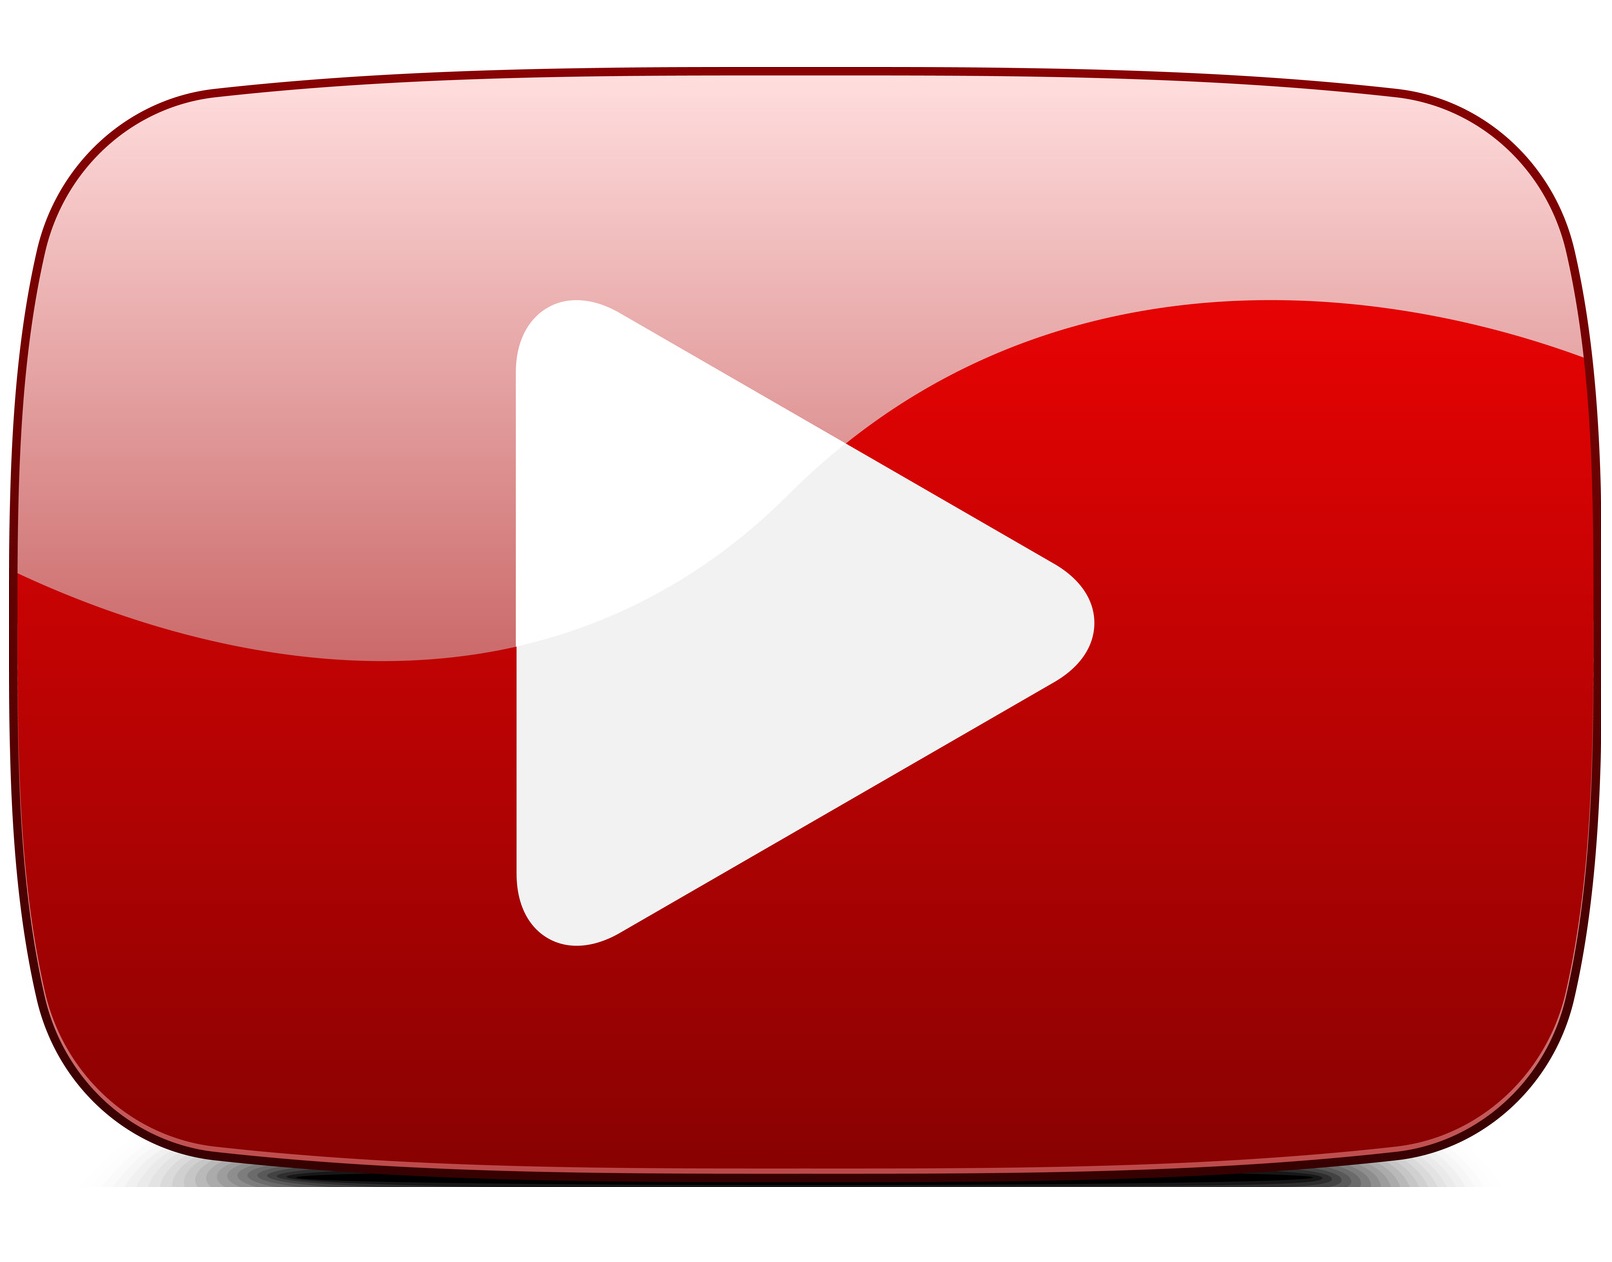 Buy YouTube Favorites to Boost Your Engagement and Popularity